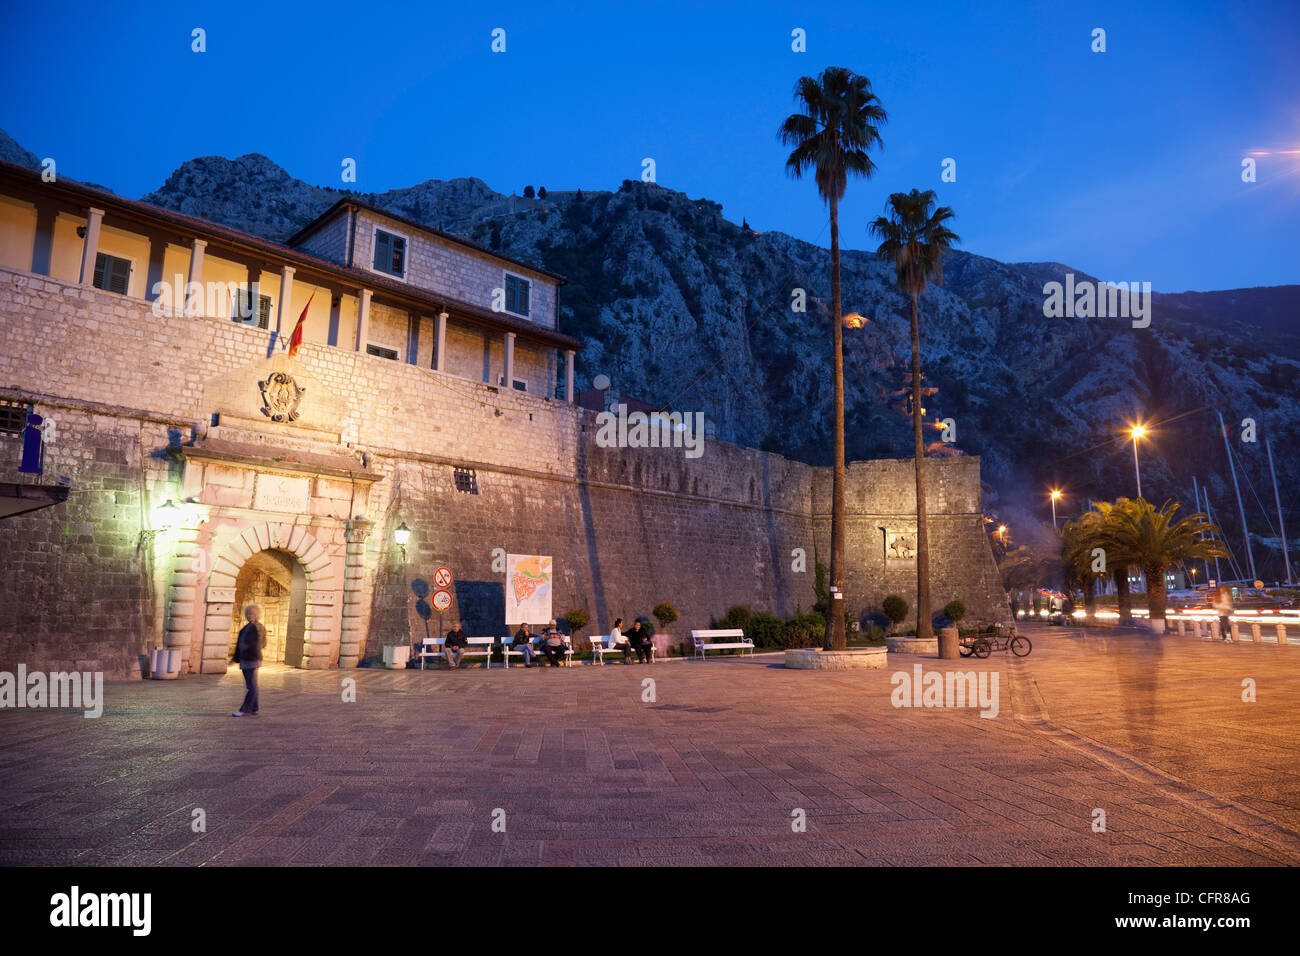 Sea Gate at night in the fortified told town of Kotor, UNESCO World Heritage Site, Montenegro, Europe Stock Photo